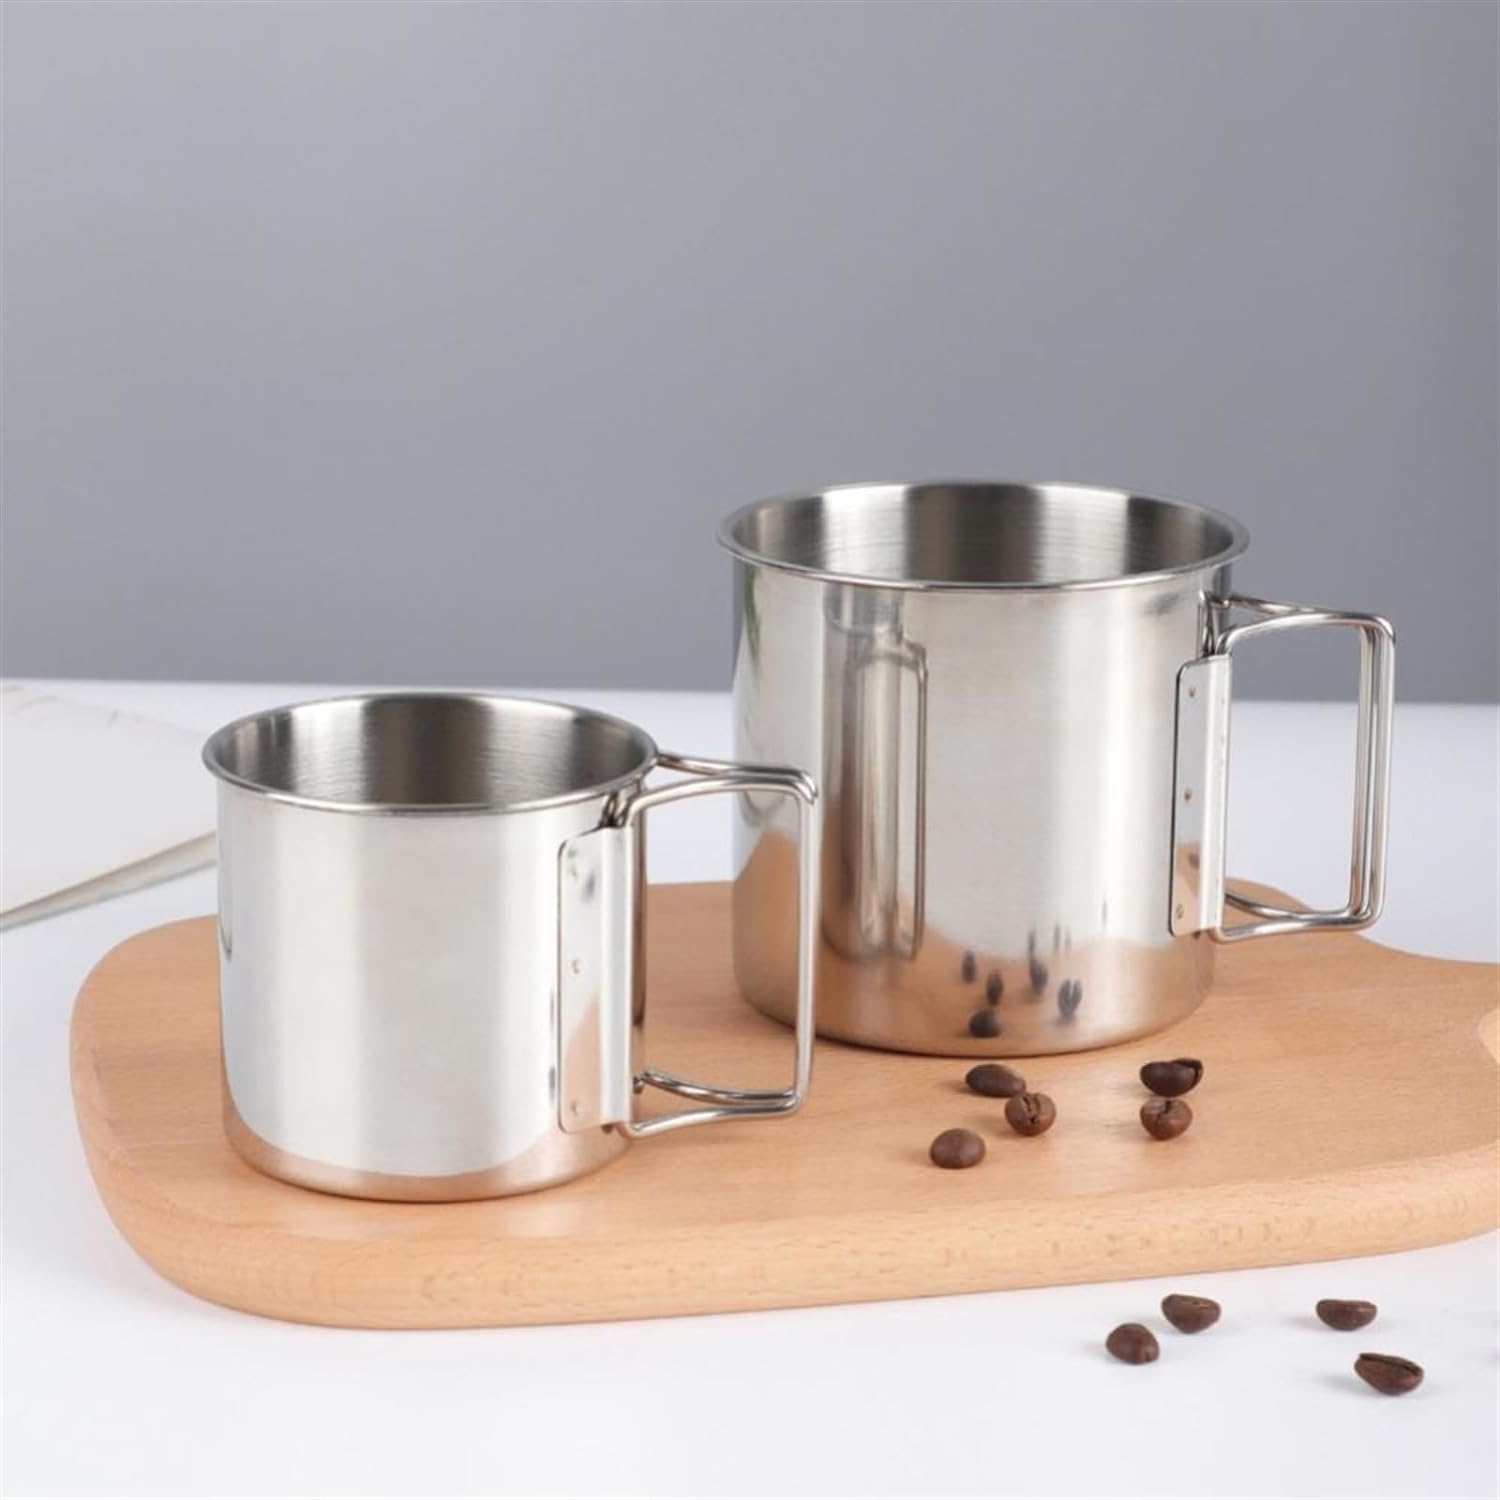 4 Piece Stackable Stainless Steel Camping Mugs with Folding Handles FX-9199